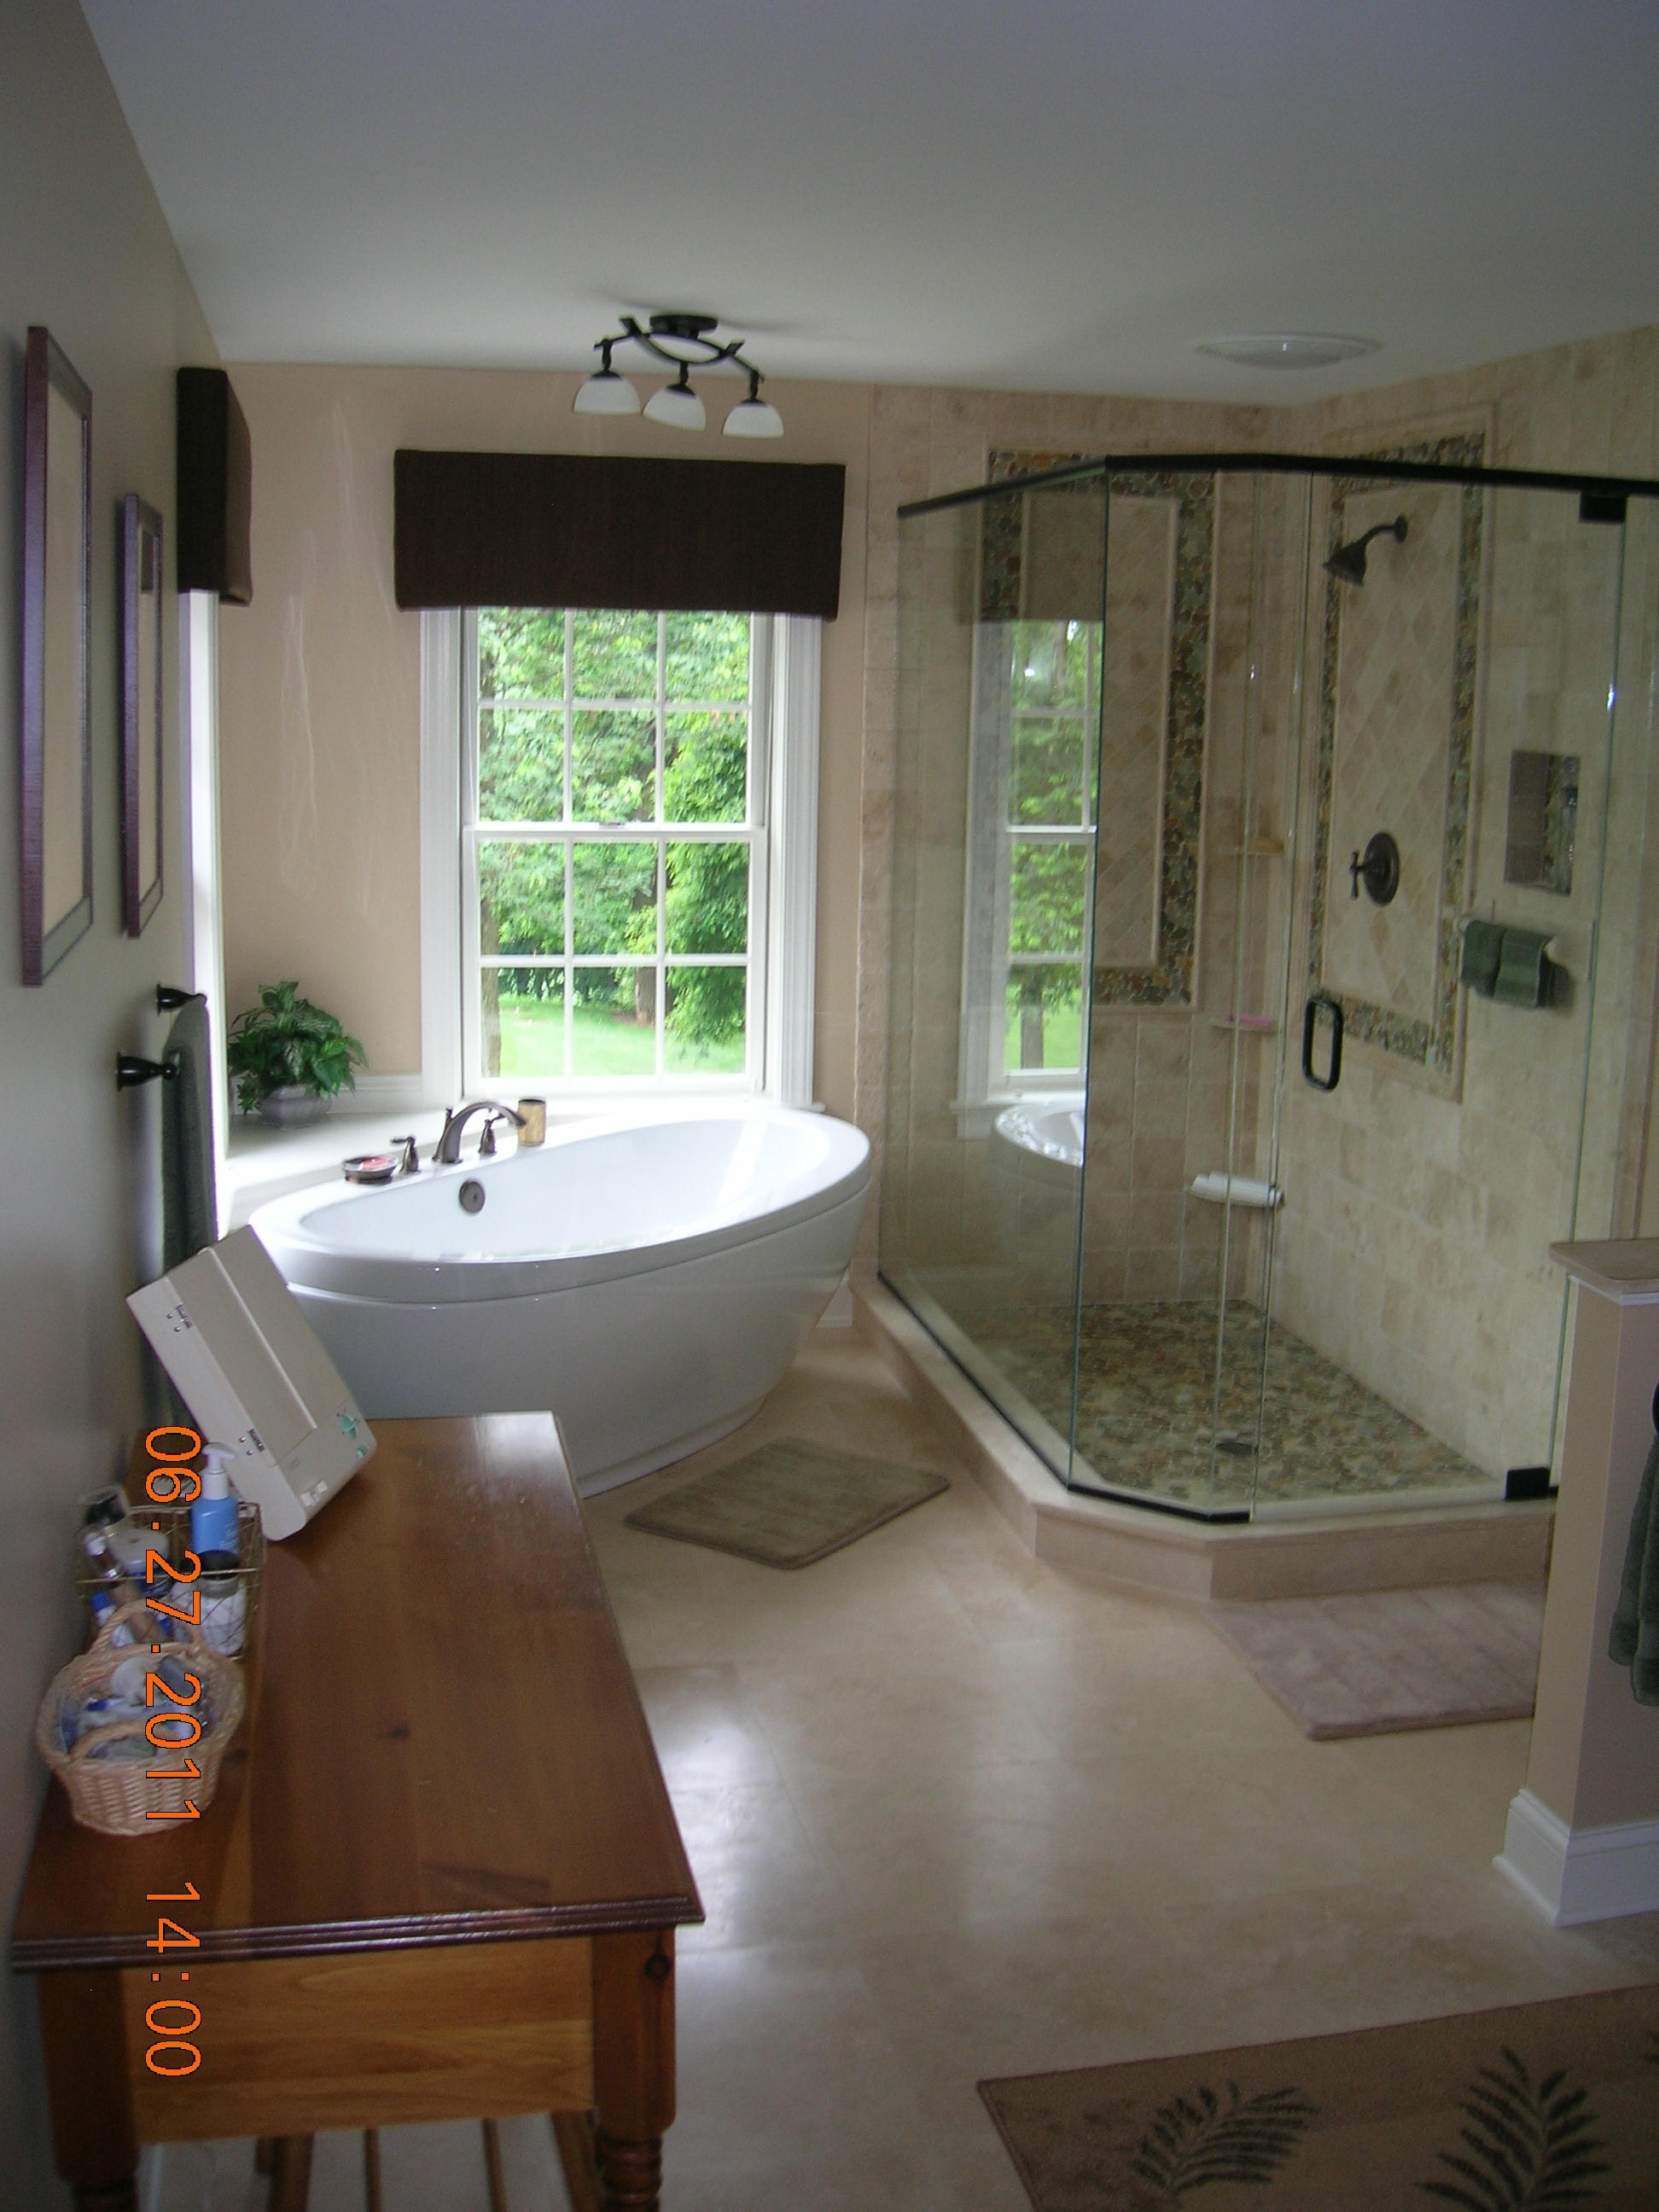 Bathroom and Kitchen Remodeling